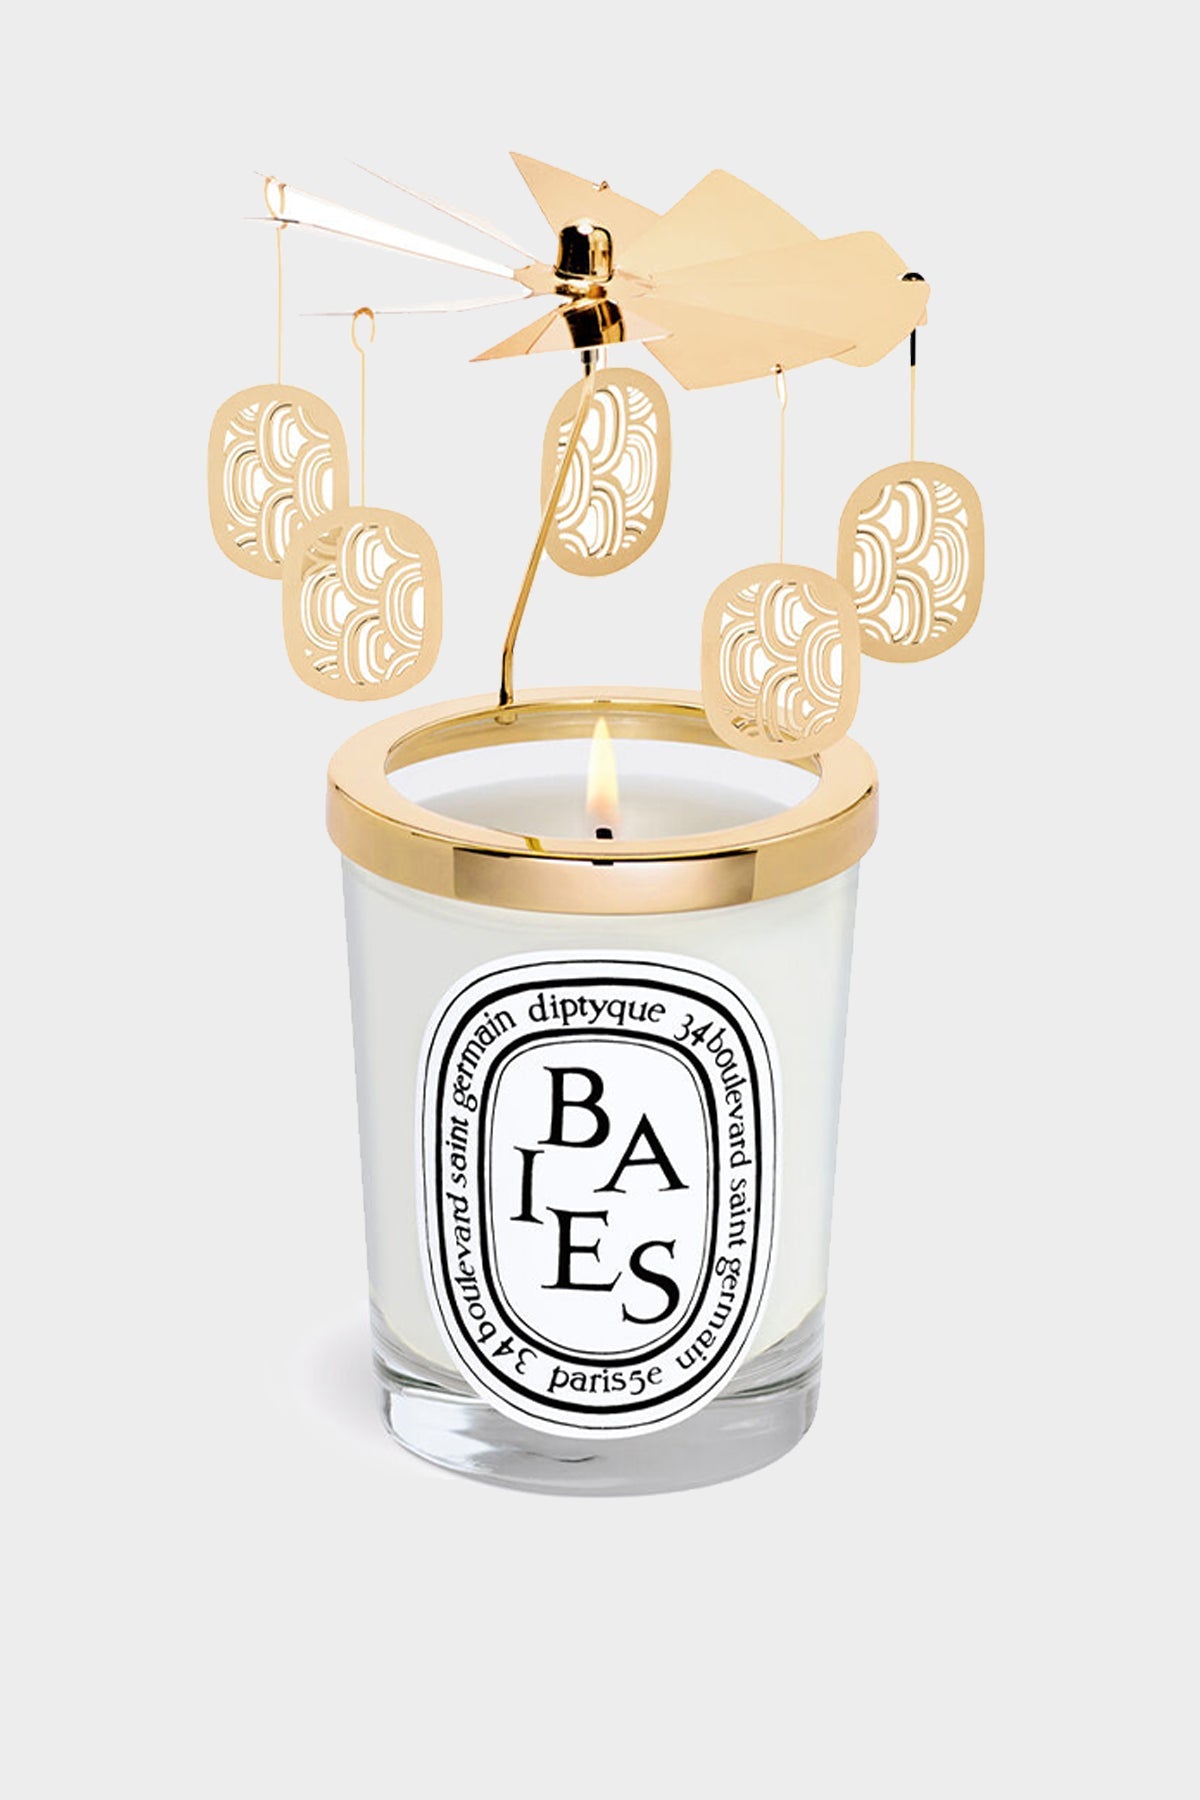 Carousel Set with Baies 190g Candle - Limited Edition - shop-olivia.com